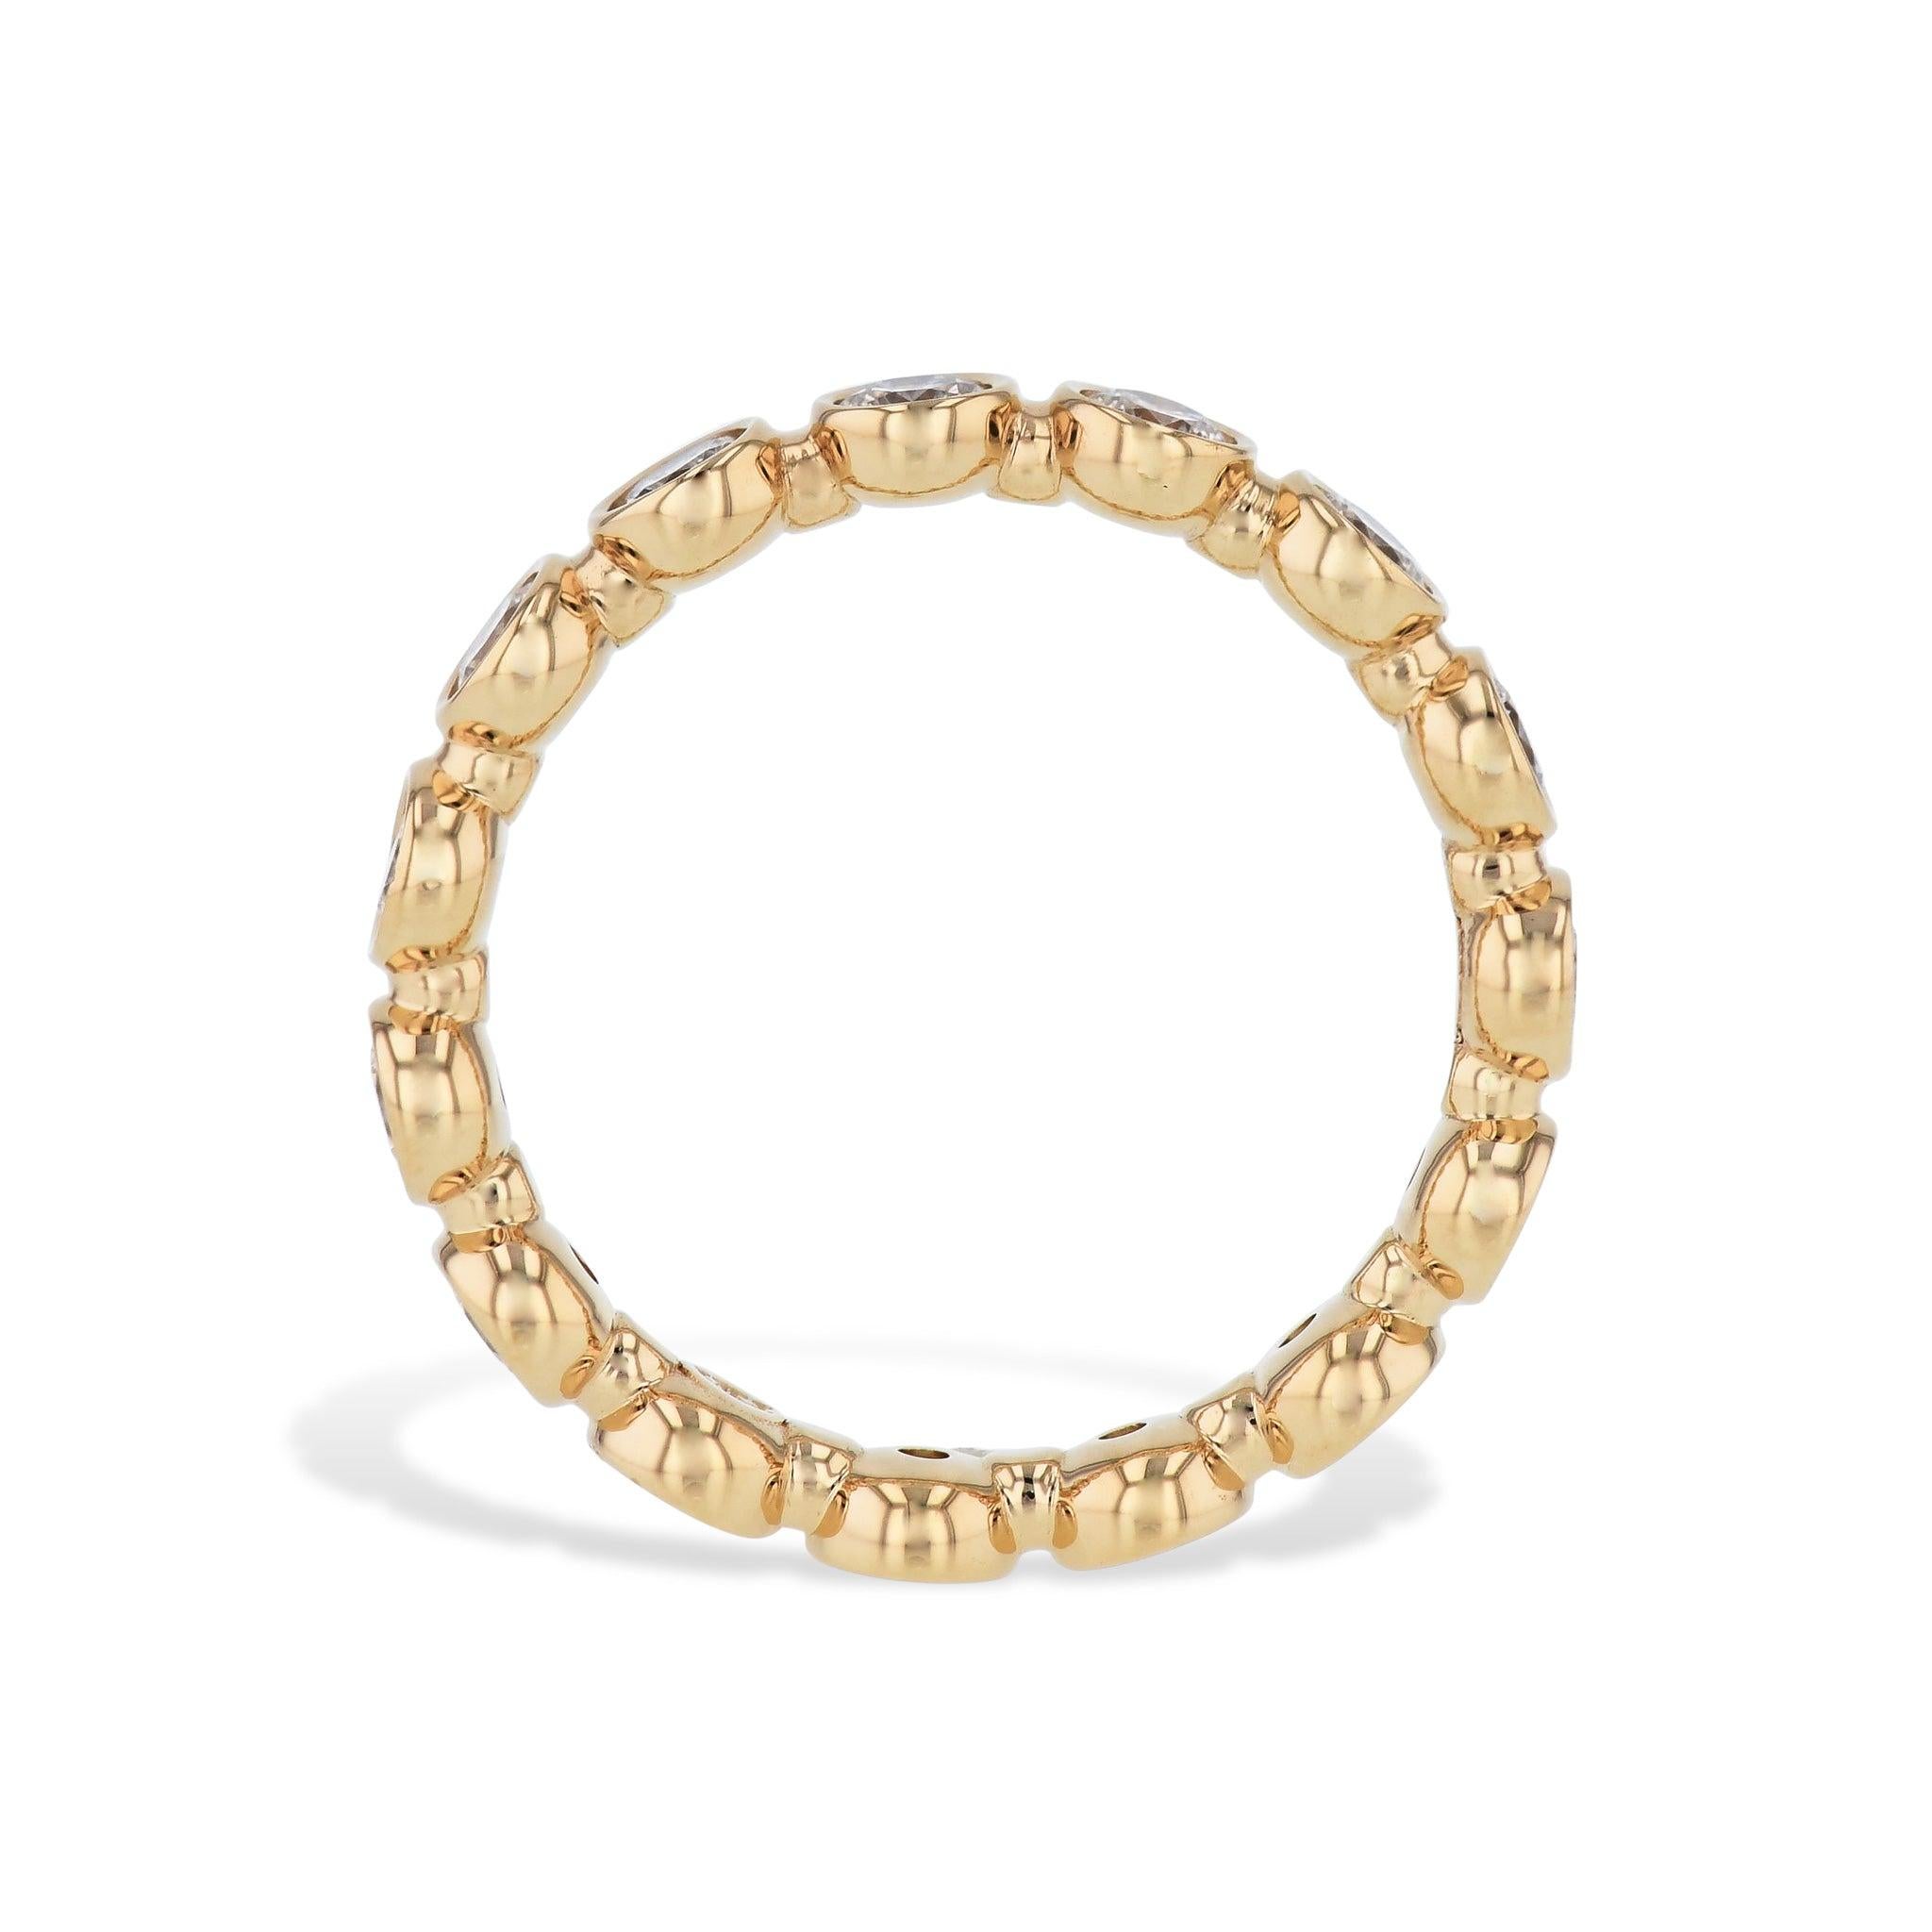 Behold the stunning Yellow Gold Round Diamond Eternity Band Ring from H&H Jewels, crafted with the utmost care and attention to detail. Featuring 18kt yellow gold, gleaming round cut diamonds, and a bezel setting for a secure and alluring look.